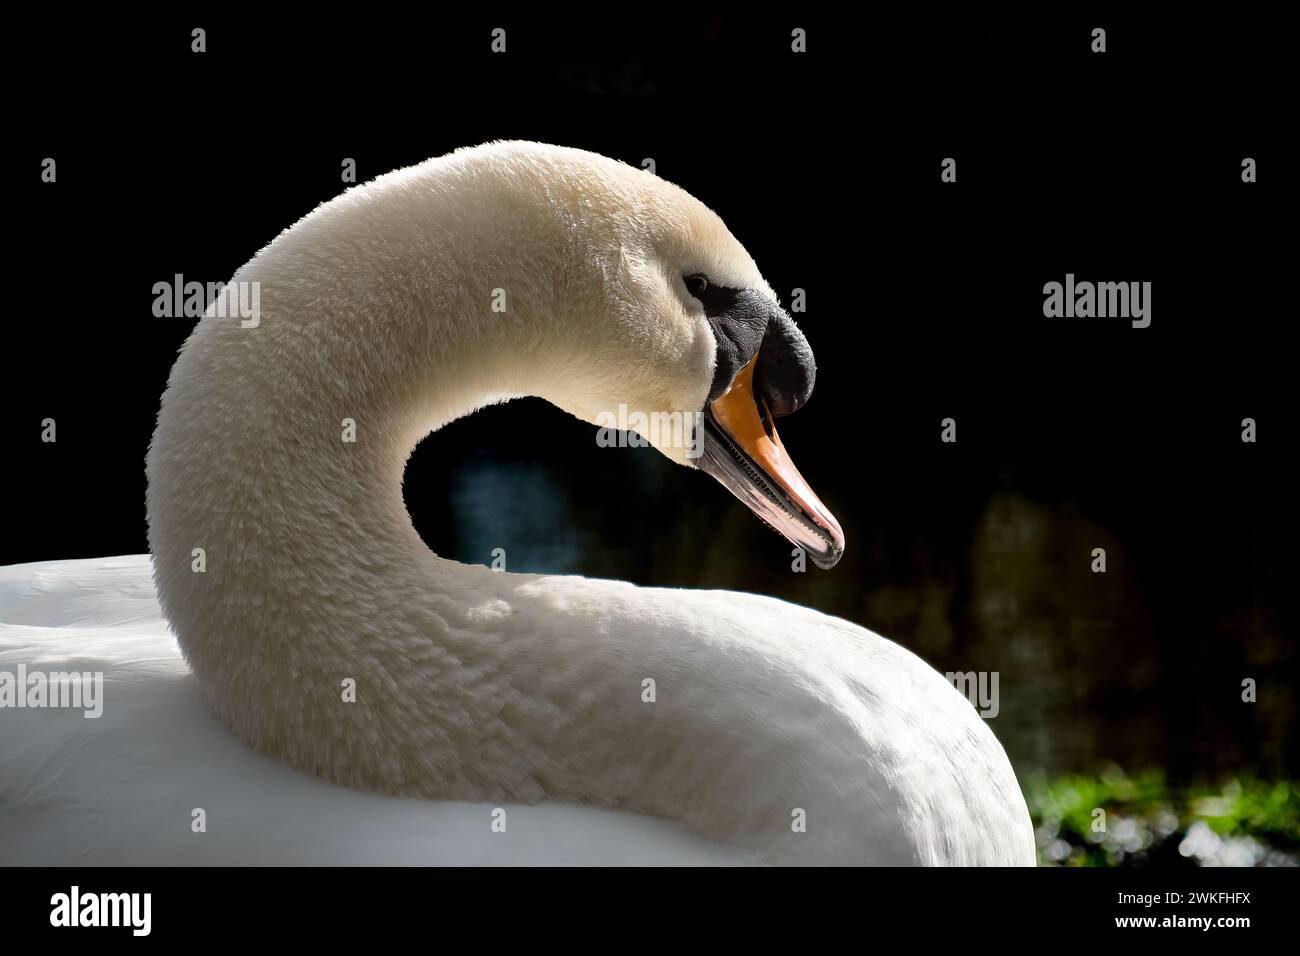 A white swan gracefully posing with a tilted head in front of the camera Stock Photo